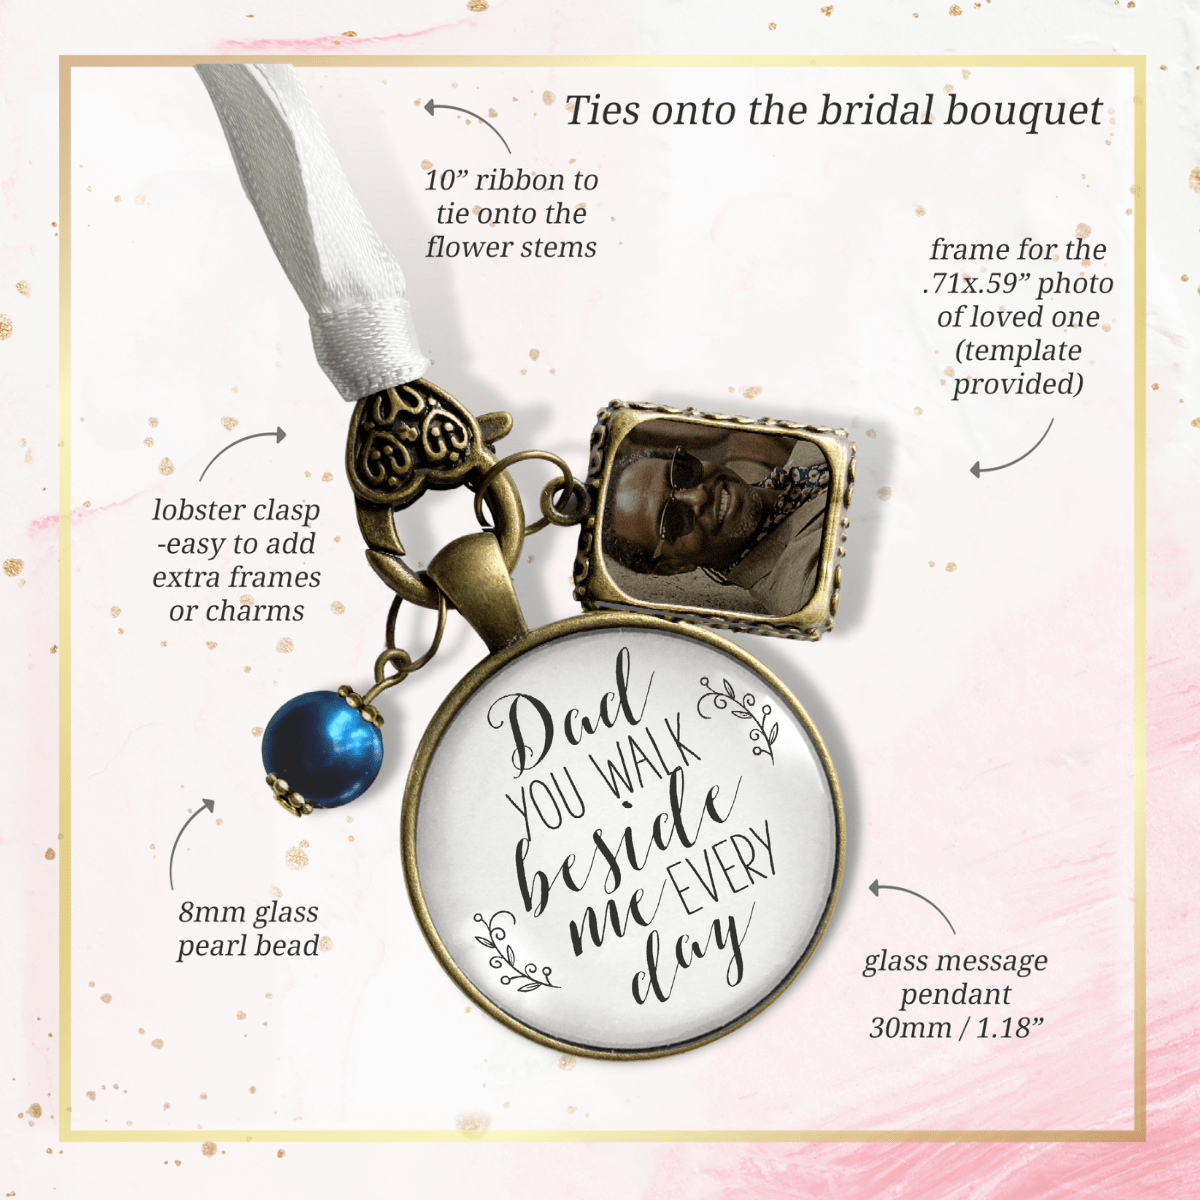 Bridal Bouquet Charm Dad Beside Me White Wedding Father Memorial Frame Blue Bead - Gutsy Goodness Handmade Jewelry Gifts